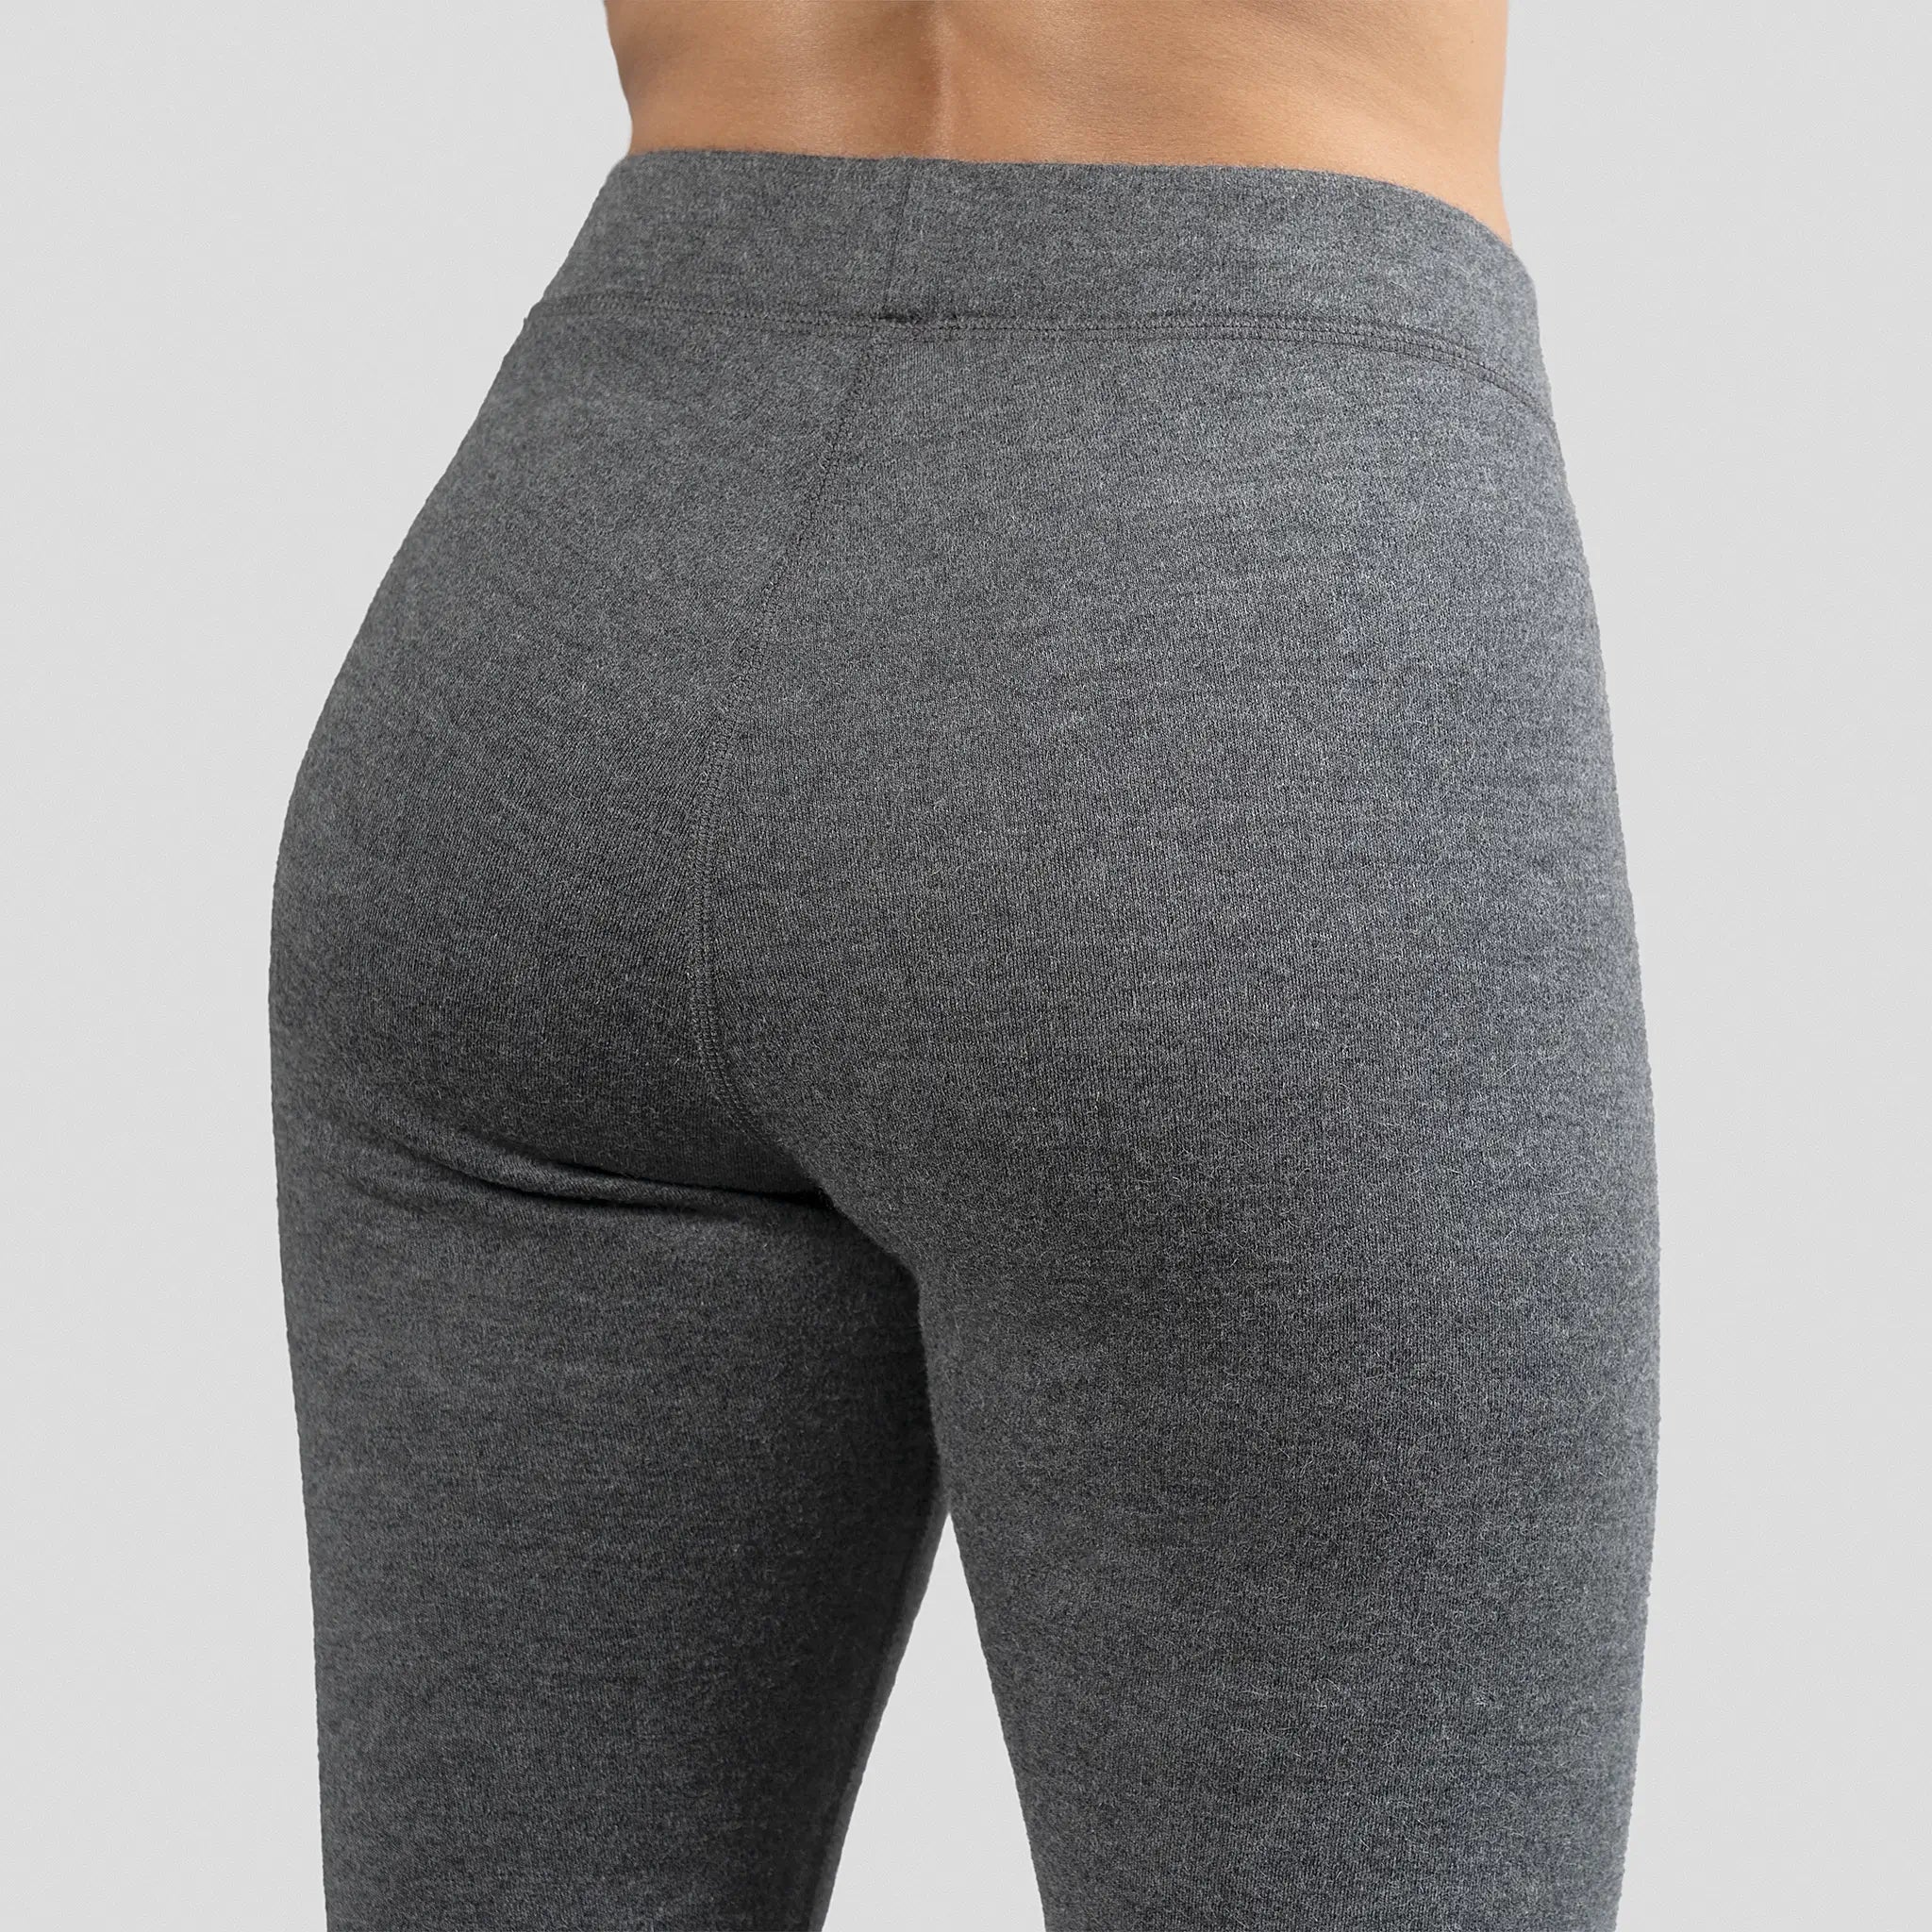  womens high performance leggings midweight color gray